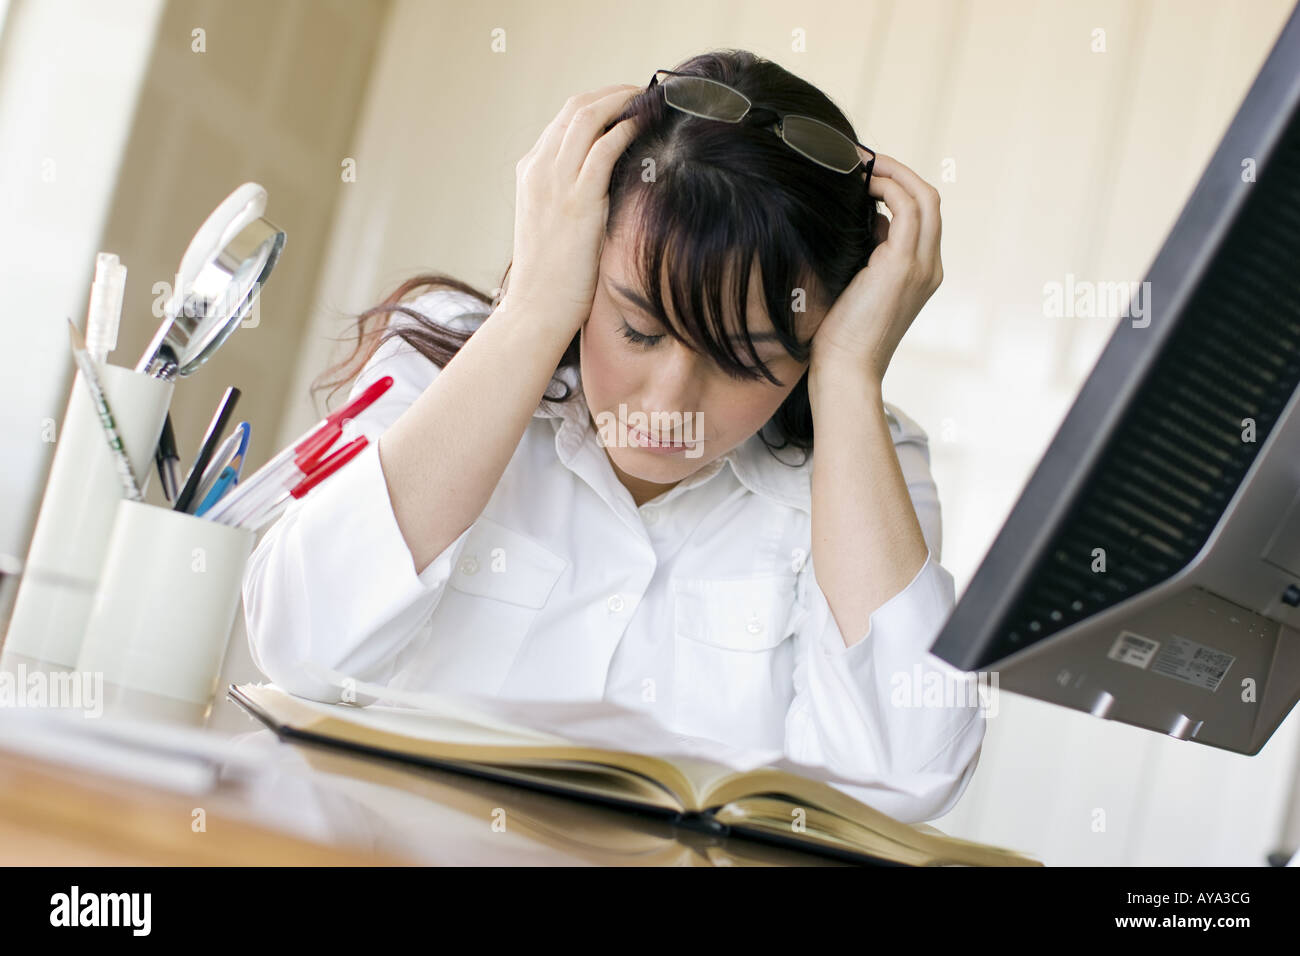 Frustrated woman using computer Stock Photo